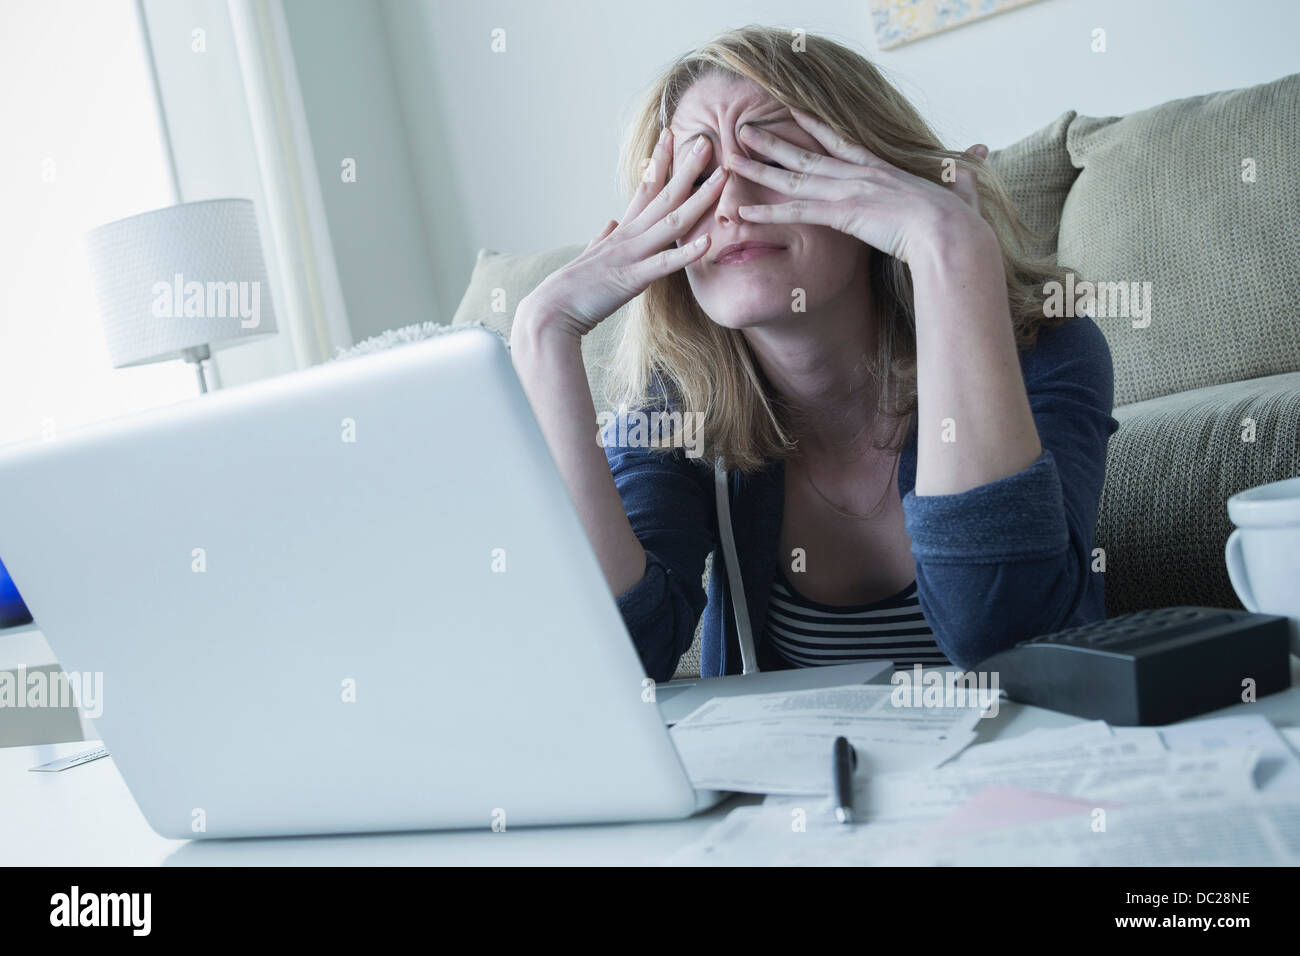 Stressed young woman rubbing eyes Stock Photo